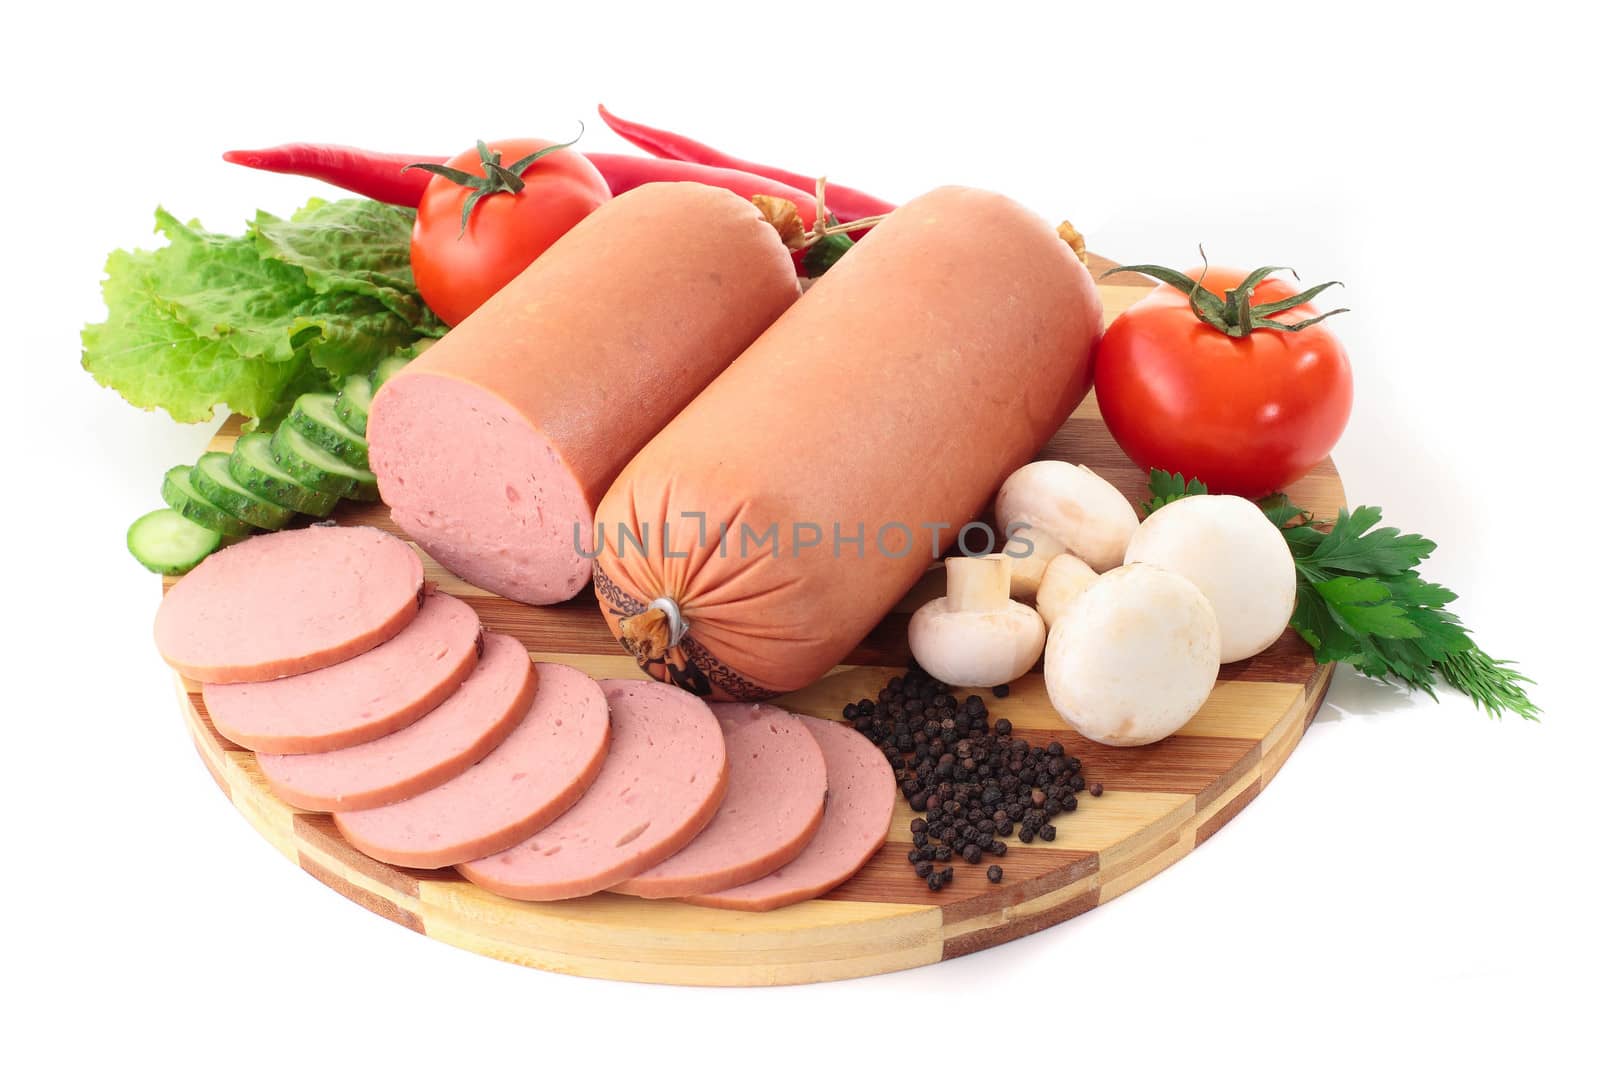 sausage on plate with vegetables